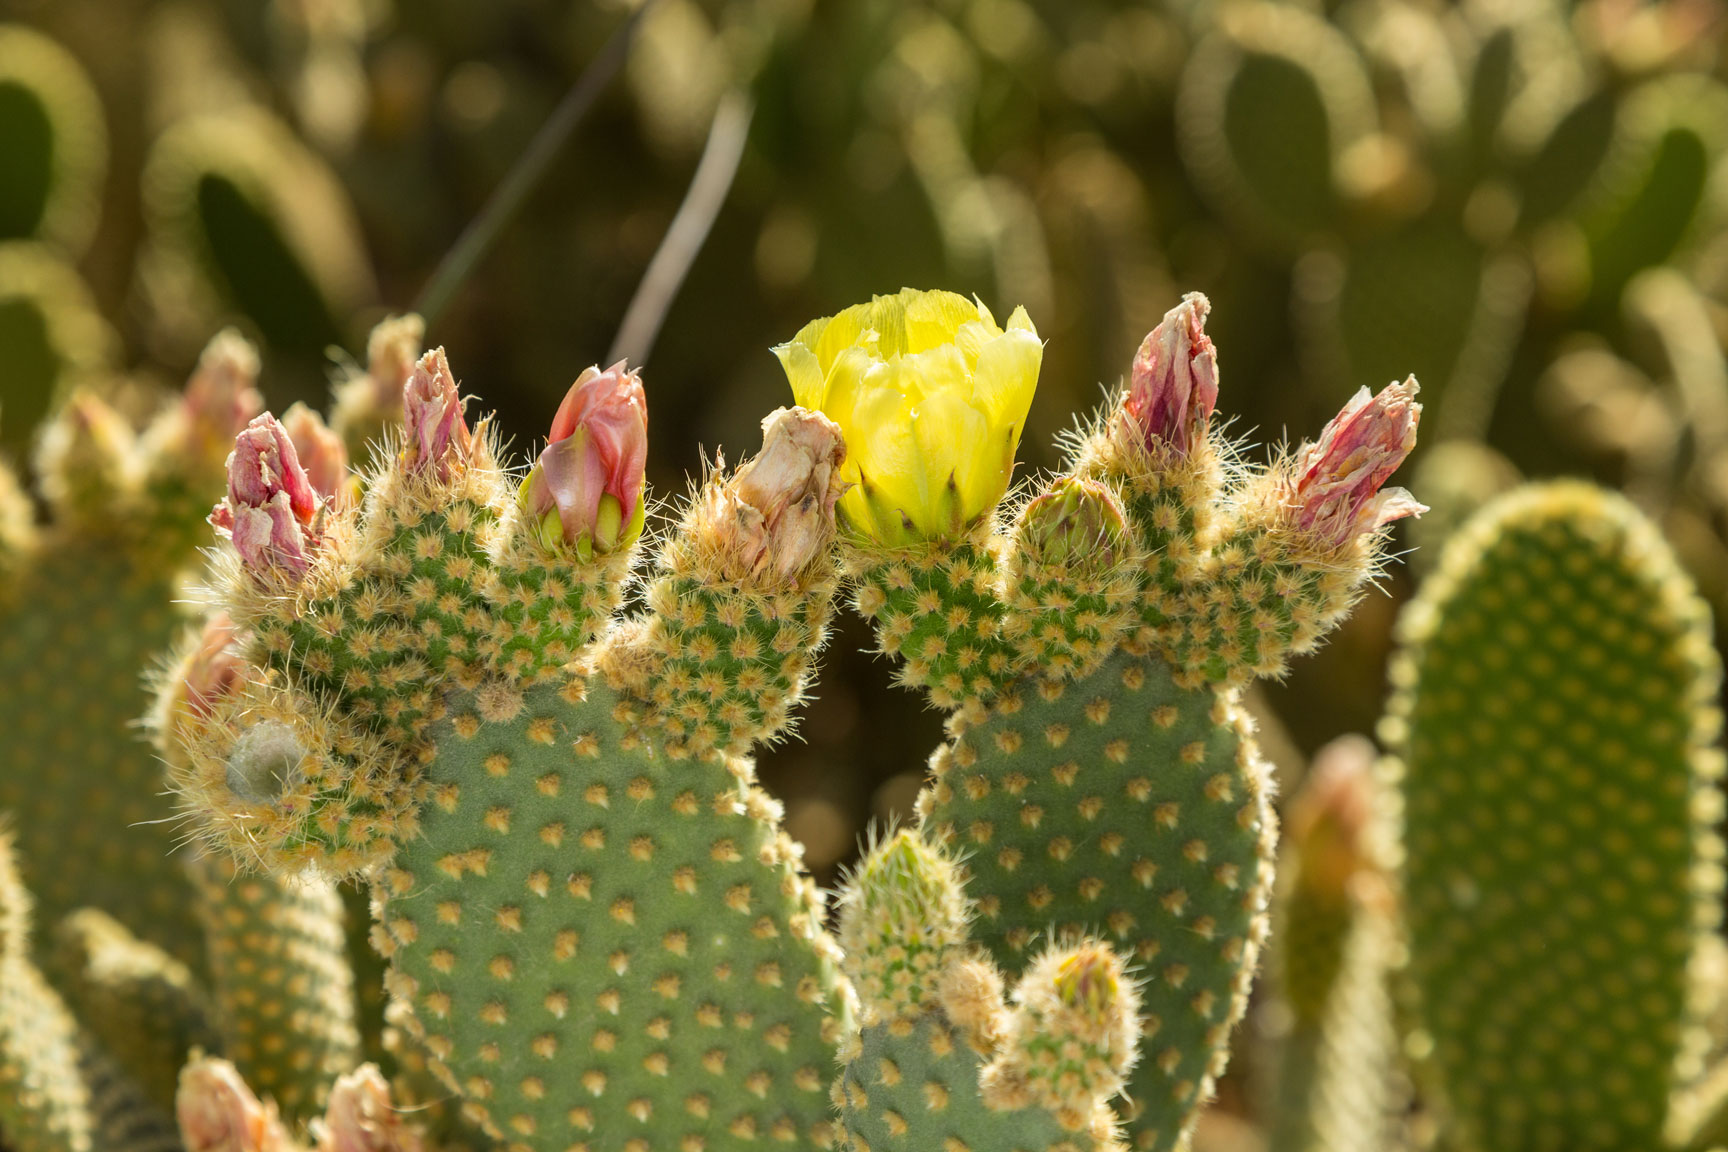 Several pads of Bunny ear cactus lined with flower buds and one lone yellow flower blooming.